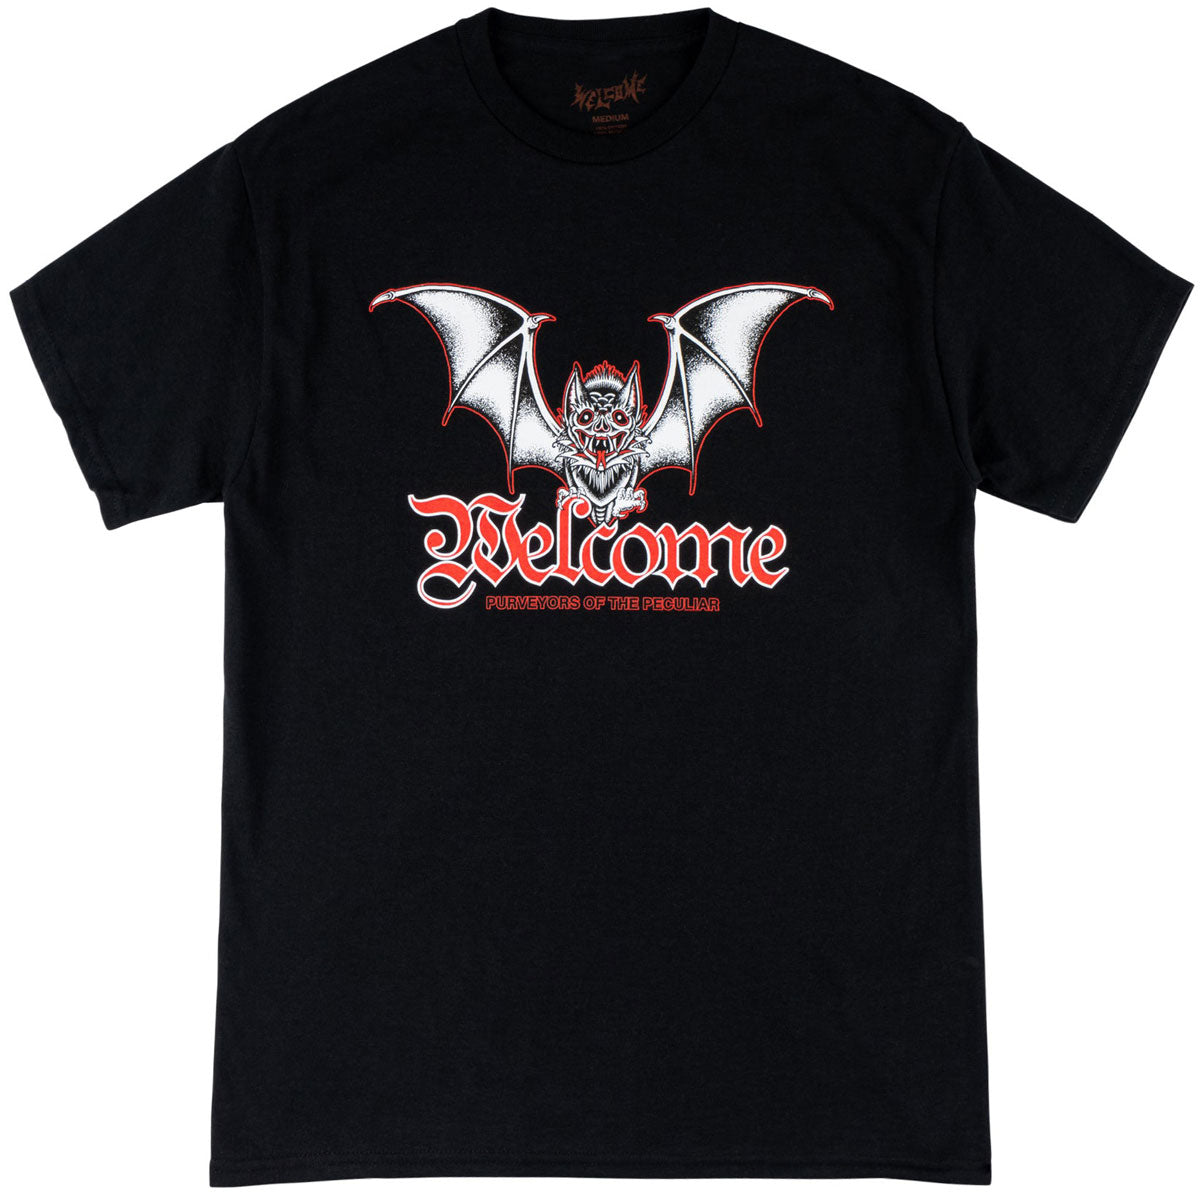 Welcome Nocturnal T-Shirt - Black image 1